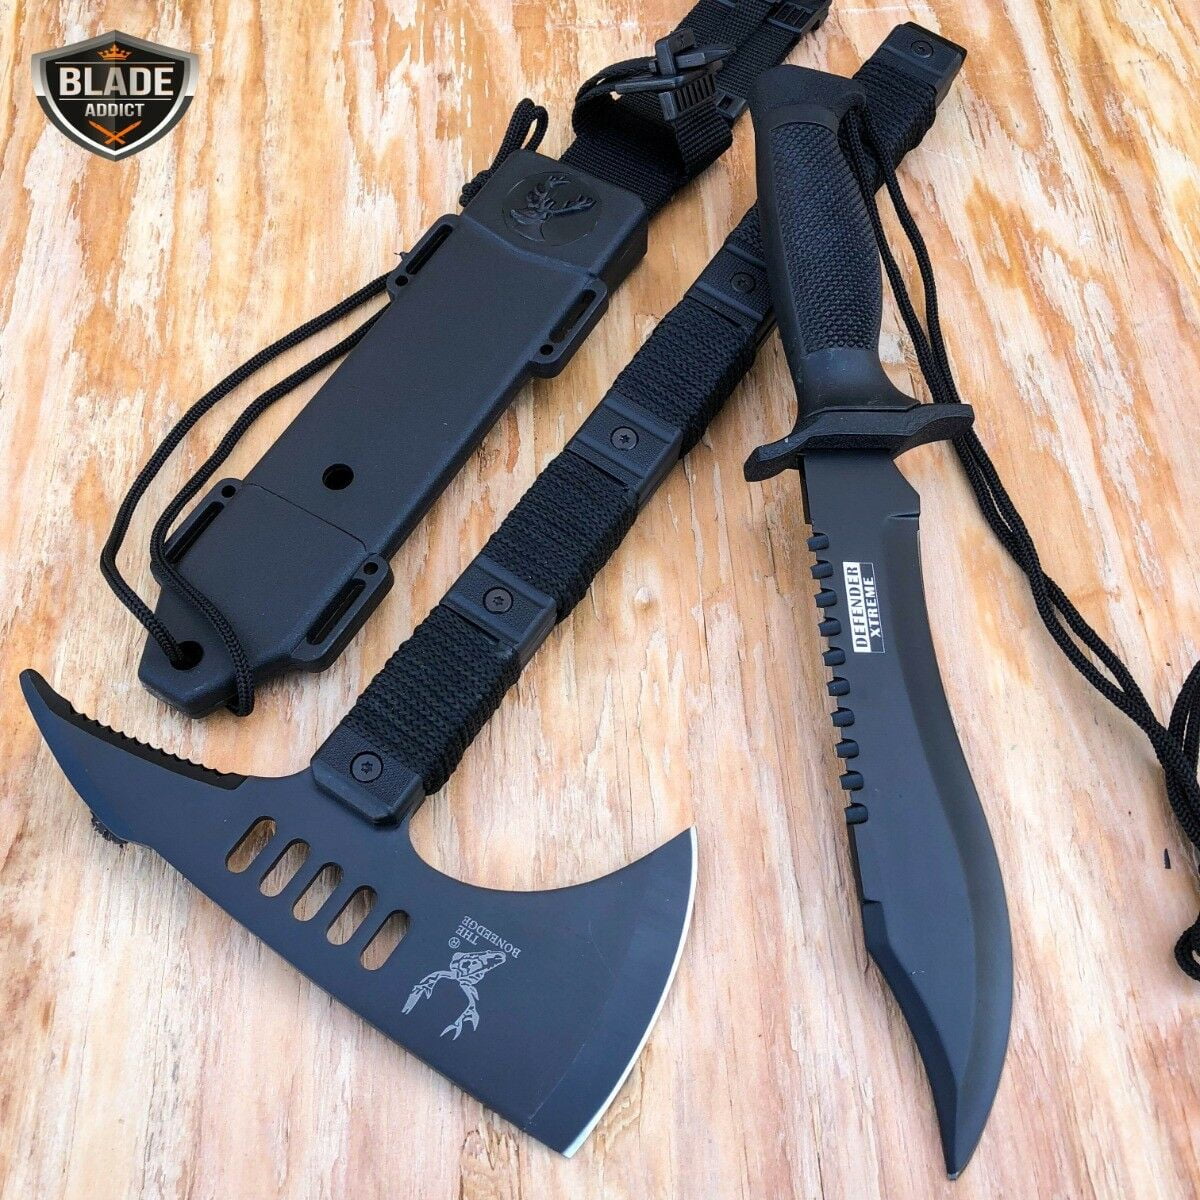  KNINE OUTDOORS Survival Shovel with Axe Set, Fixed Blade Knife,  Camping Knife with Rope Handle, Folding Saw, Knife Sheathes, Hunting Knife  Set of 9 : Sports & Outdoors